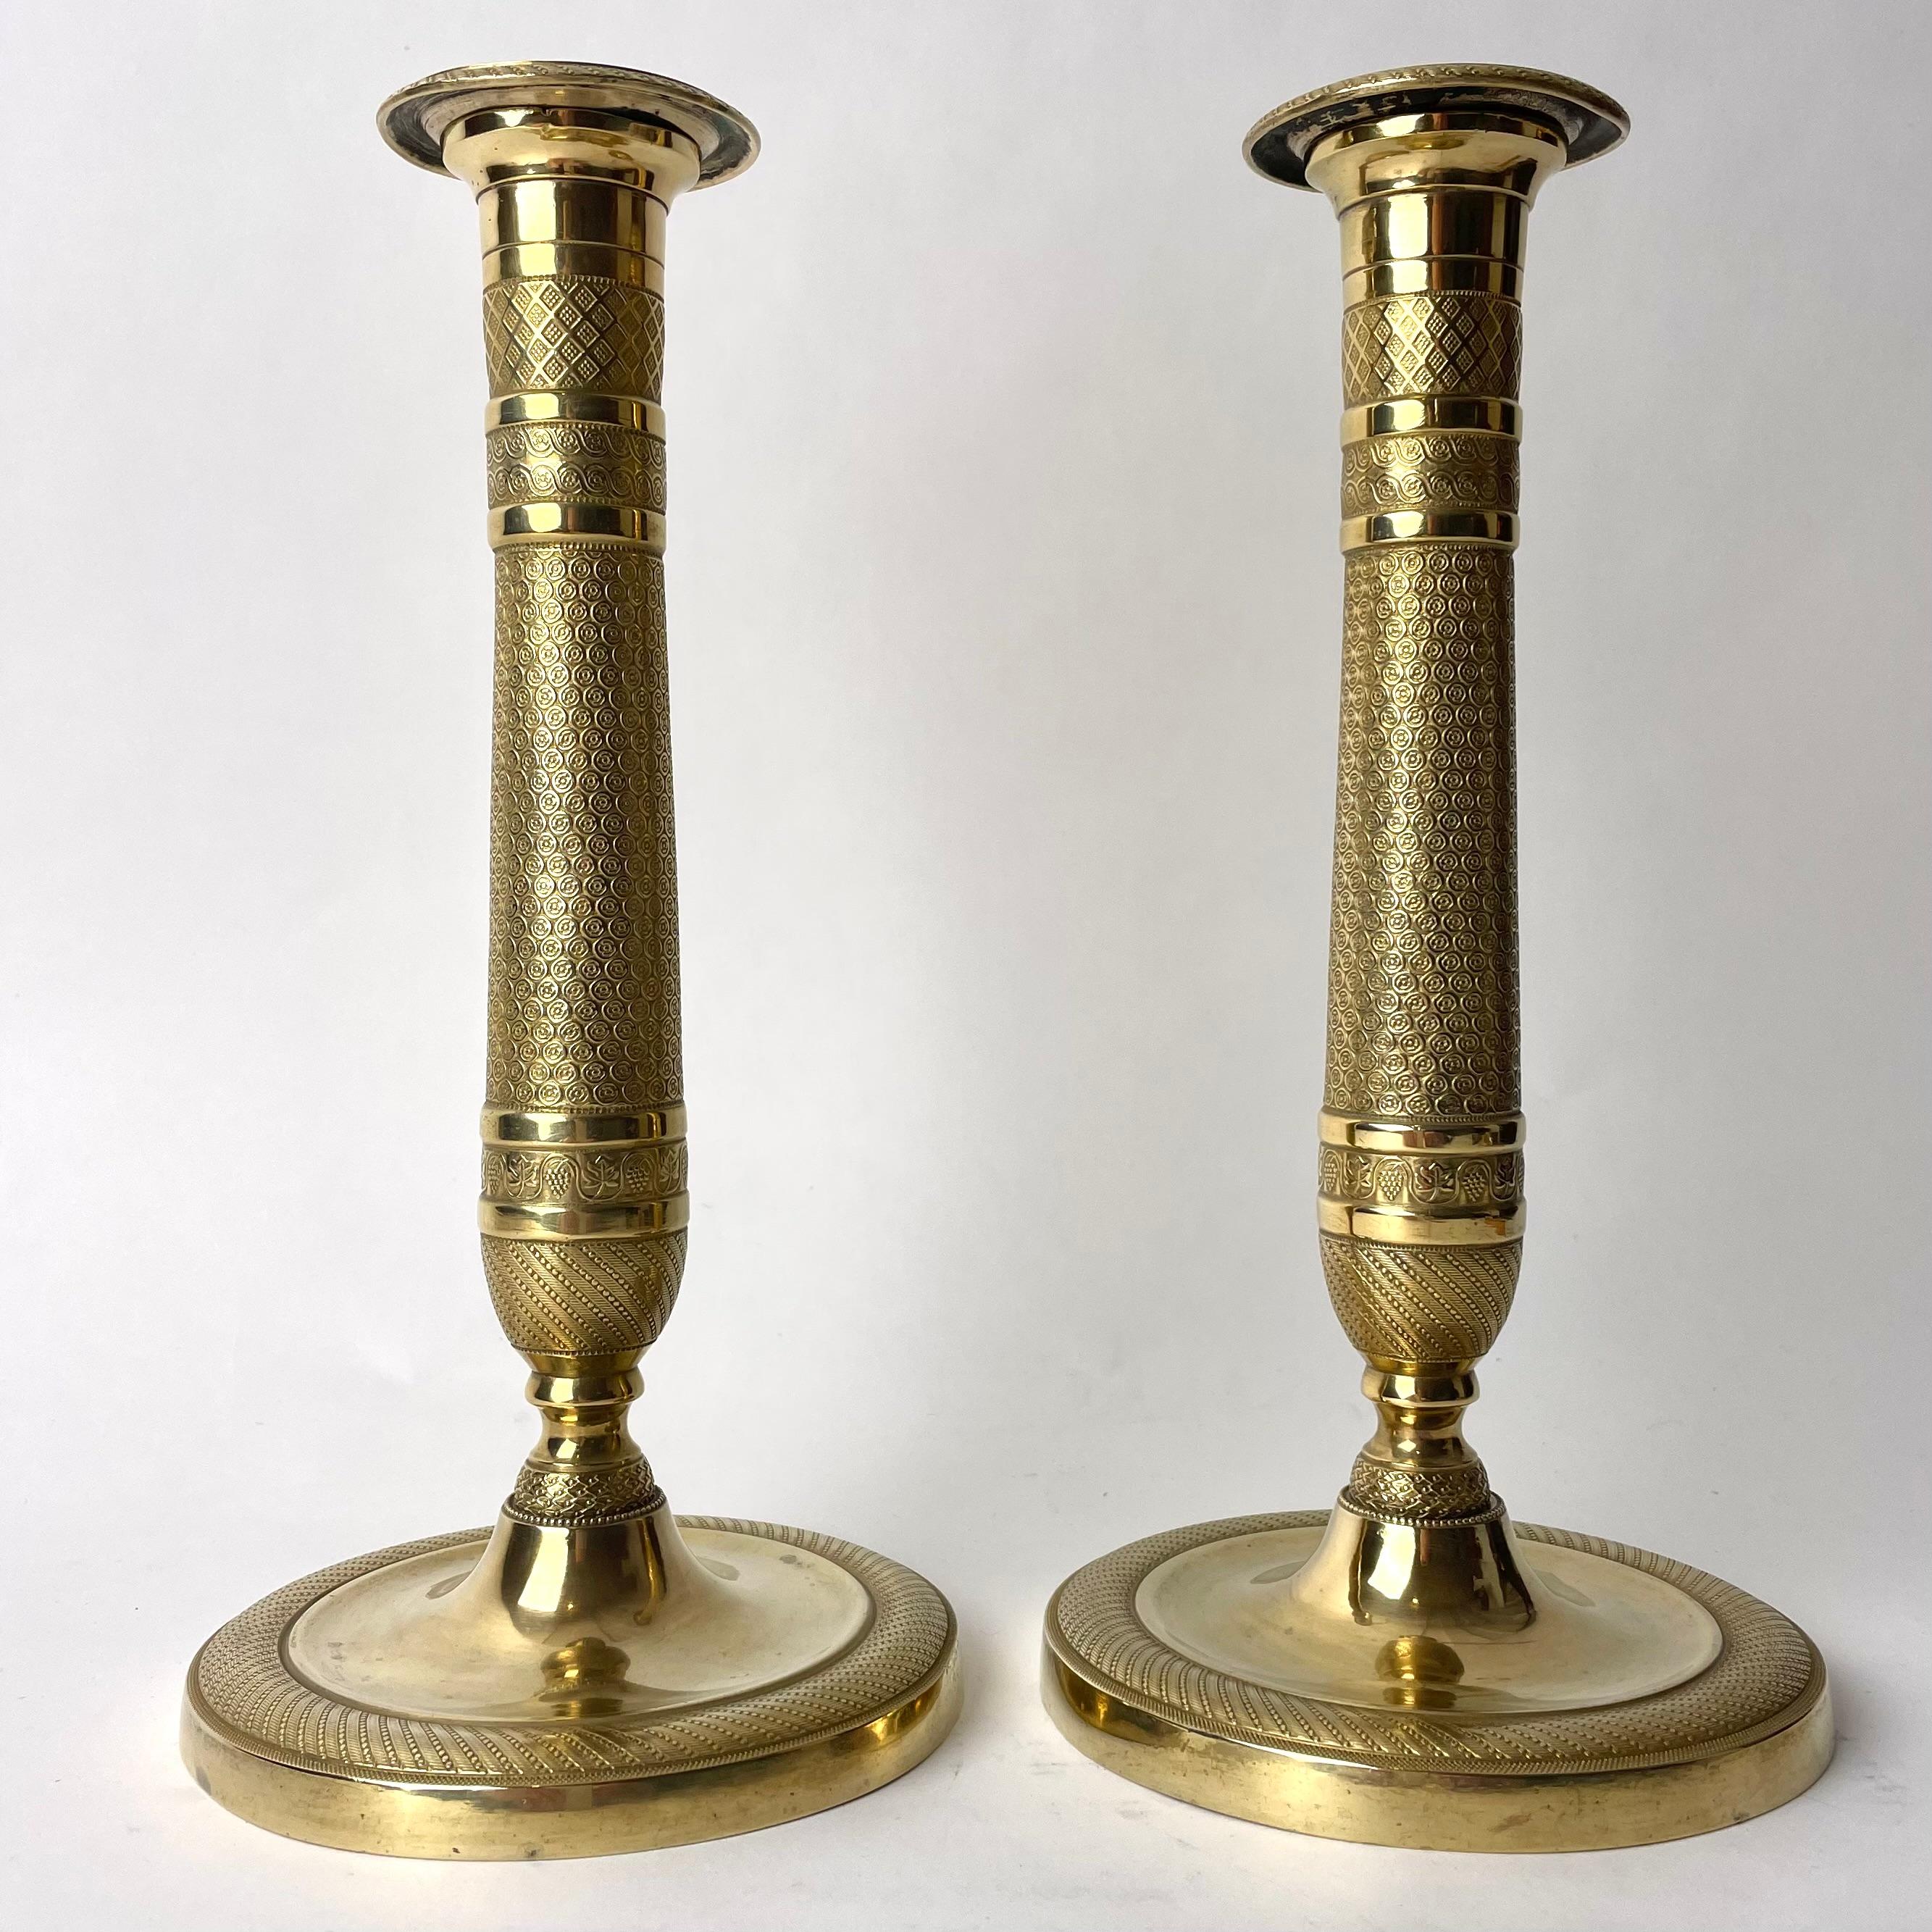 A beautiful pair of gilt Empire Candlesticks from France. made during the 1820s. Good gilt and with period Empire decor of flowers, grapes and check pattern.


Wear consistent with age and use 